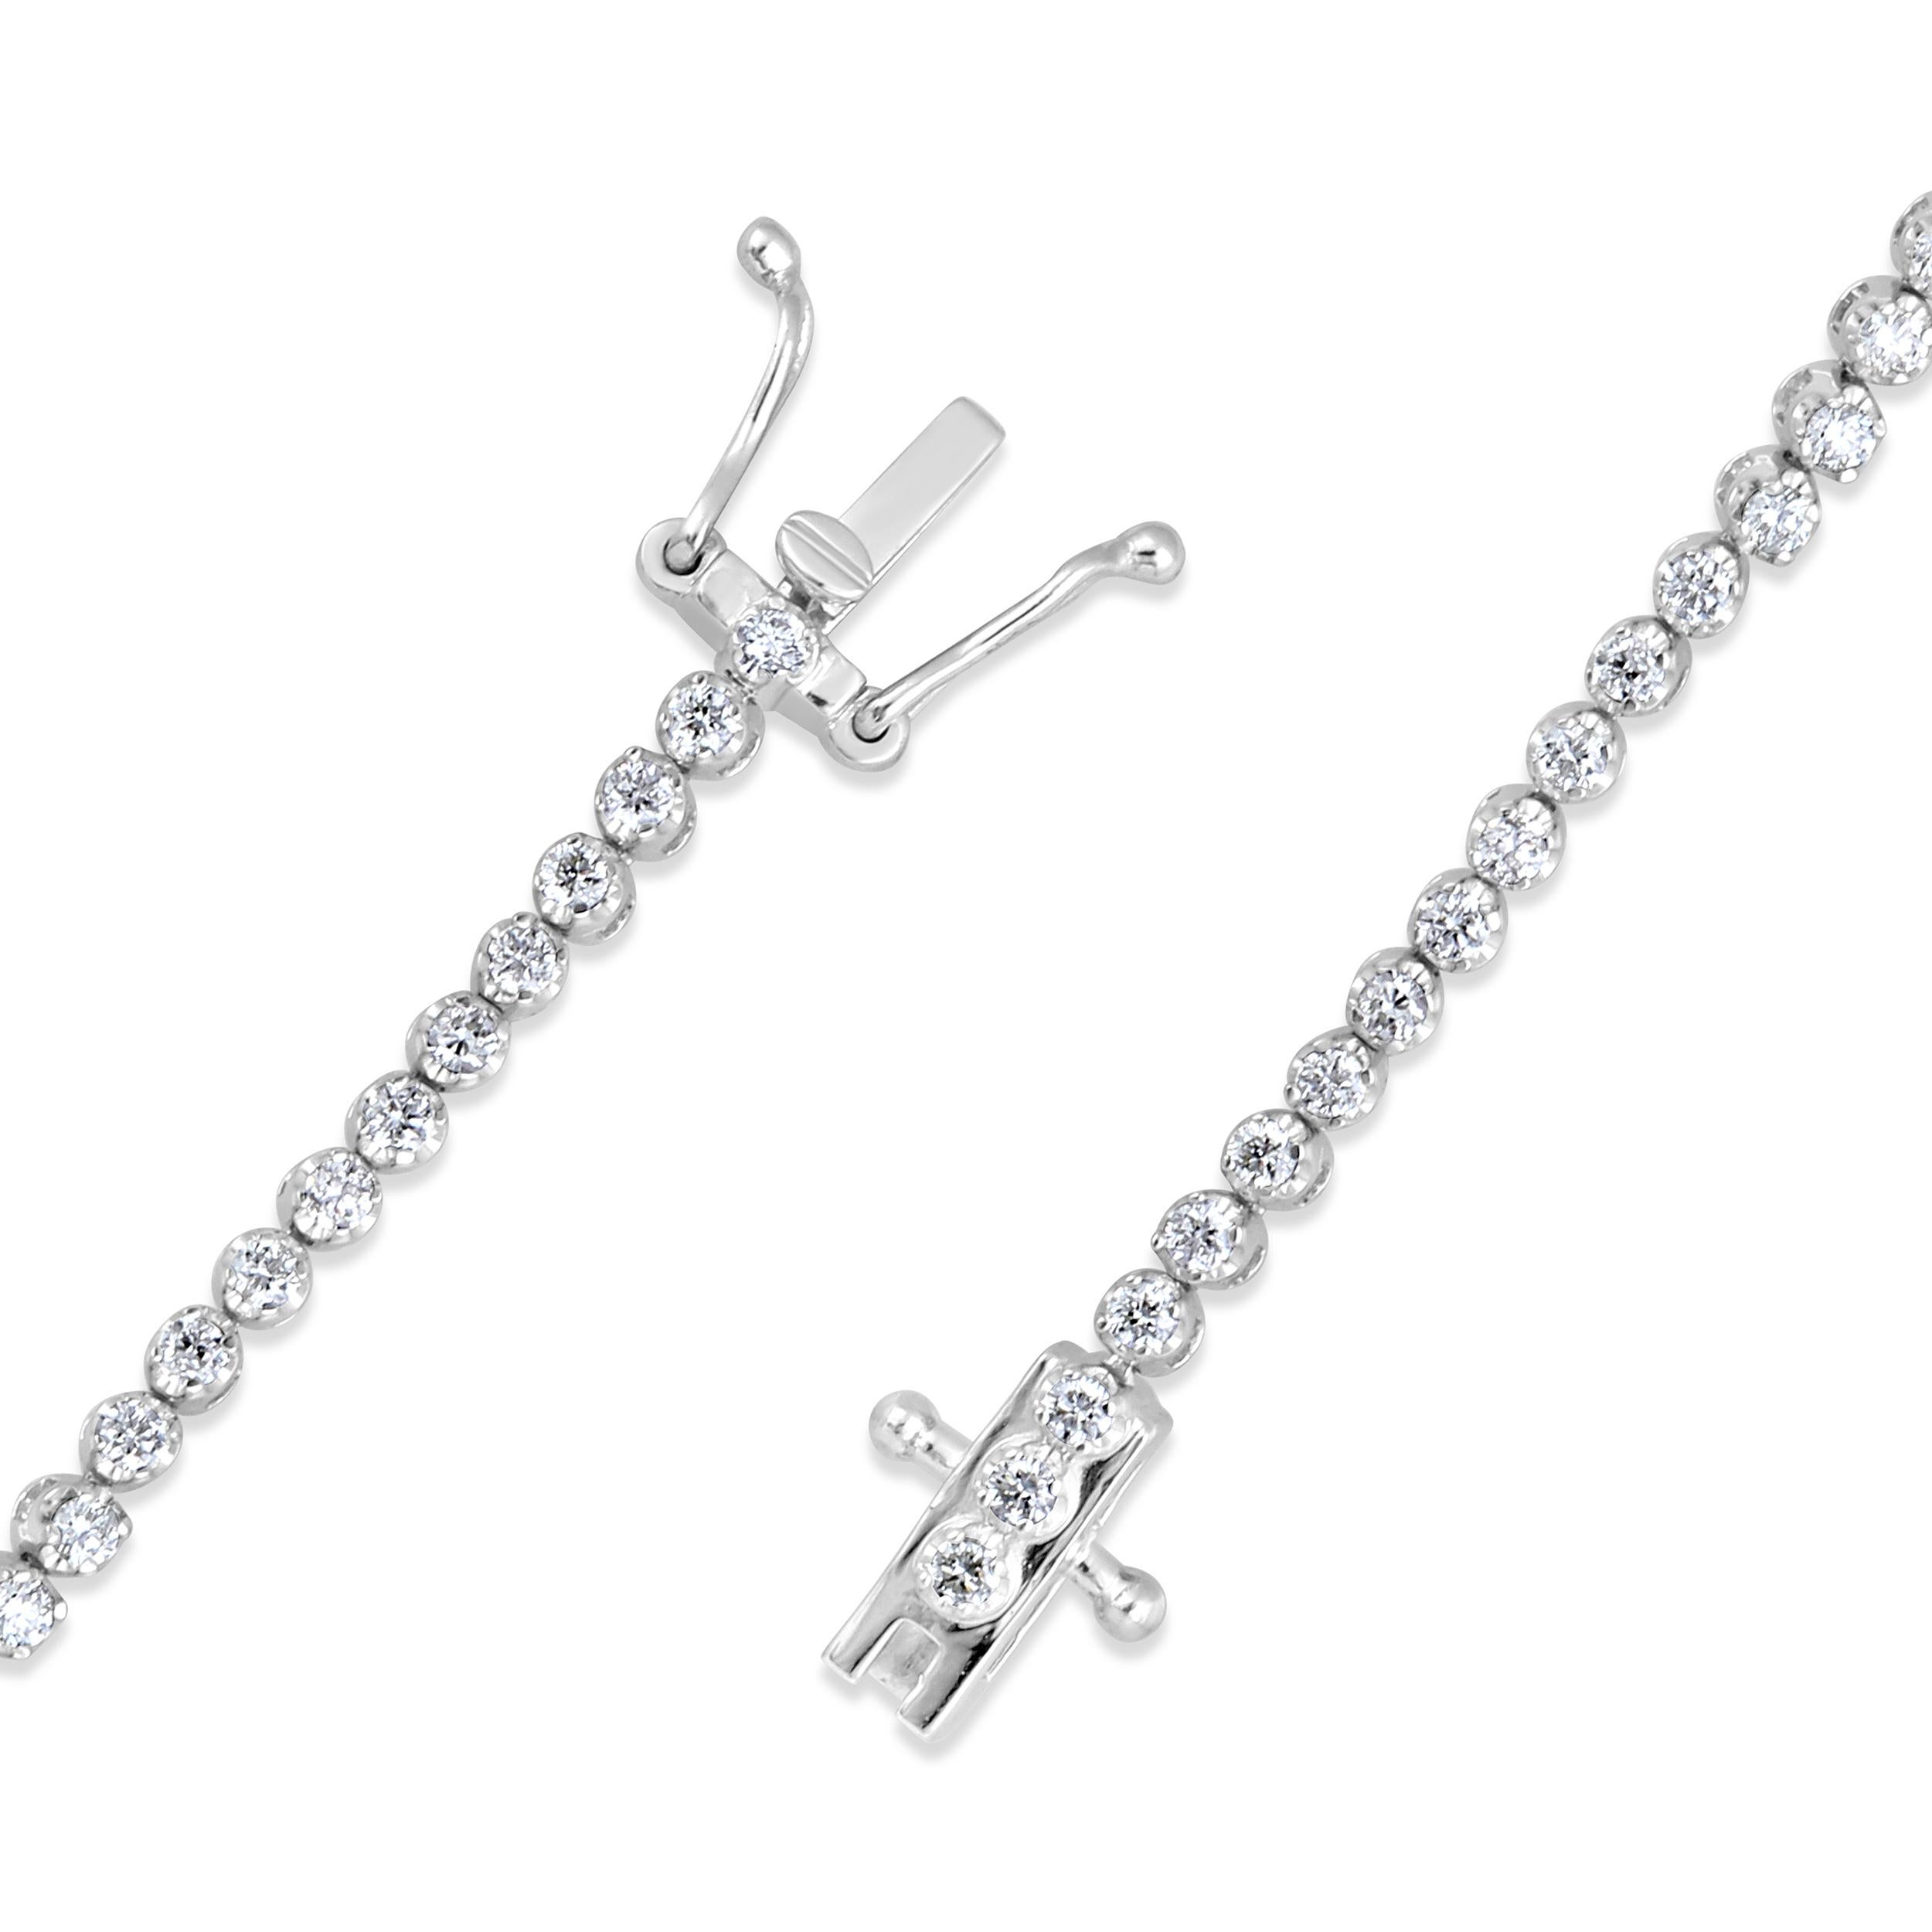 Crafted in 5.11 grams of 14K White Gold, the bracelet contains 88 stones of Round Diamonds with a total of 0.97 carat in G-H color and VS-SI carat. The bracelet length is 7 inches.

CONTEMPORARY AND TIMELESS ESSENCE: Crafted in 14-karat/18-karat